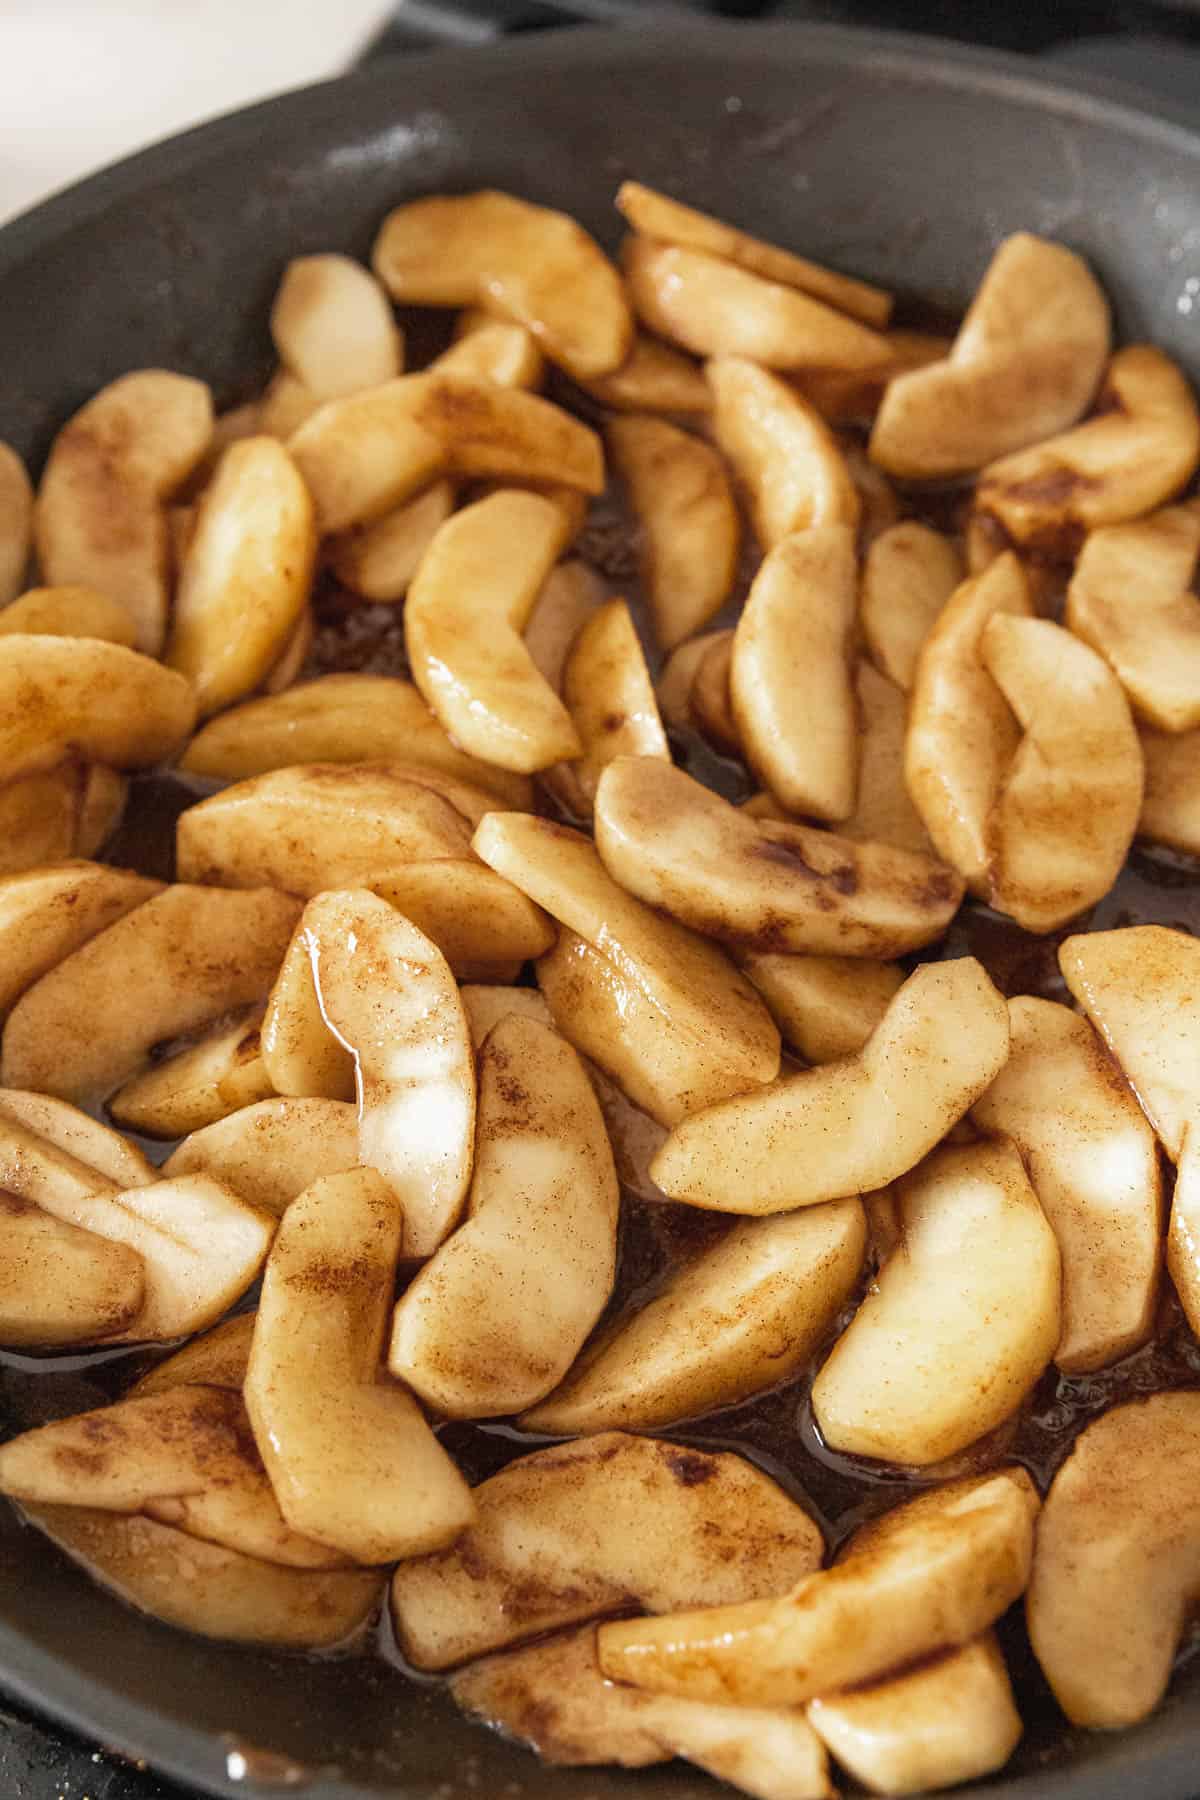 Sliced apples coated in apple pie spice cooking in a black pan.